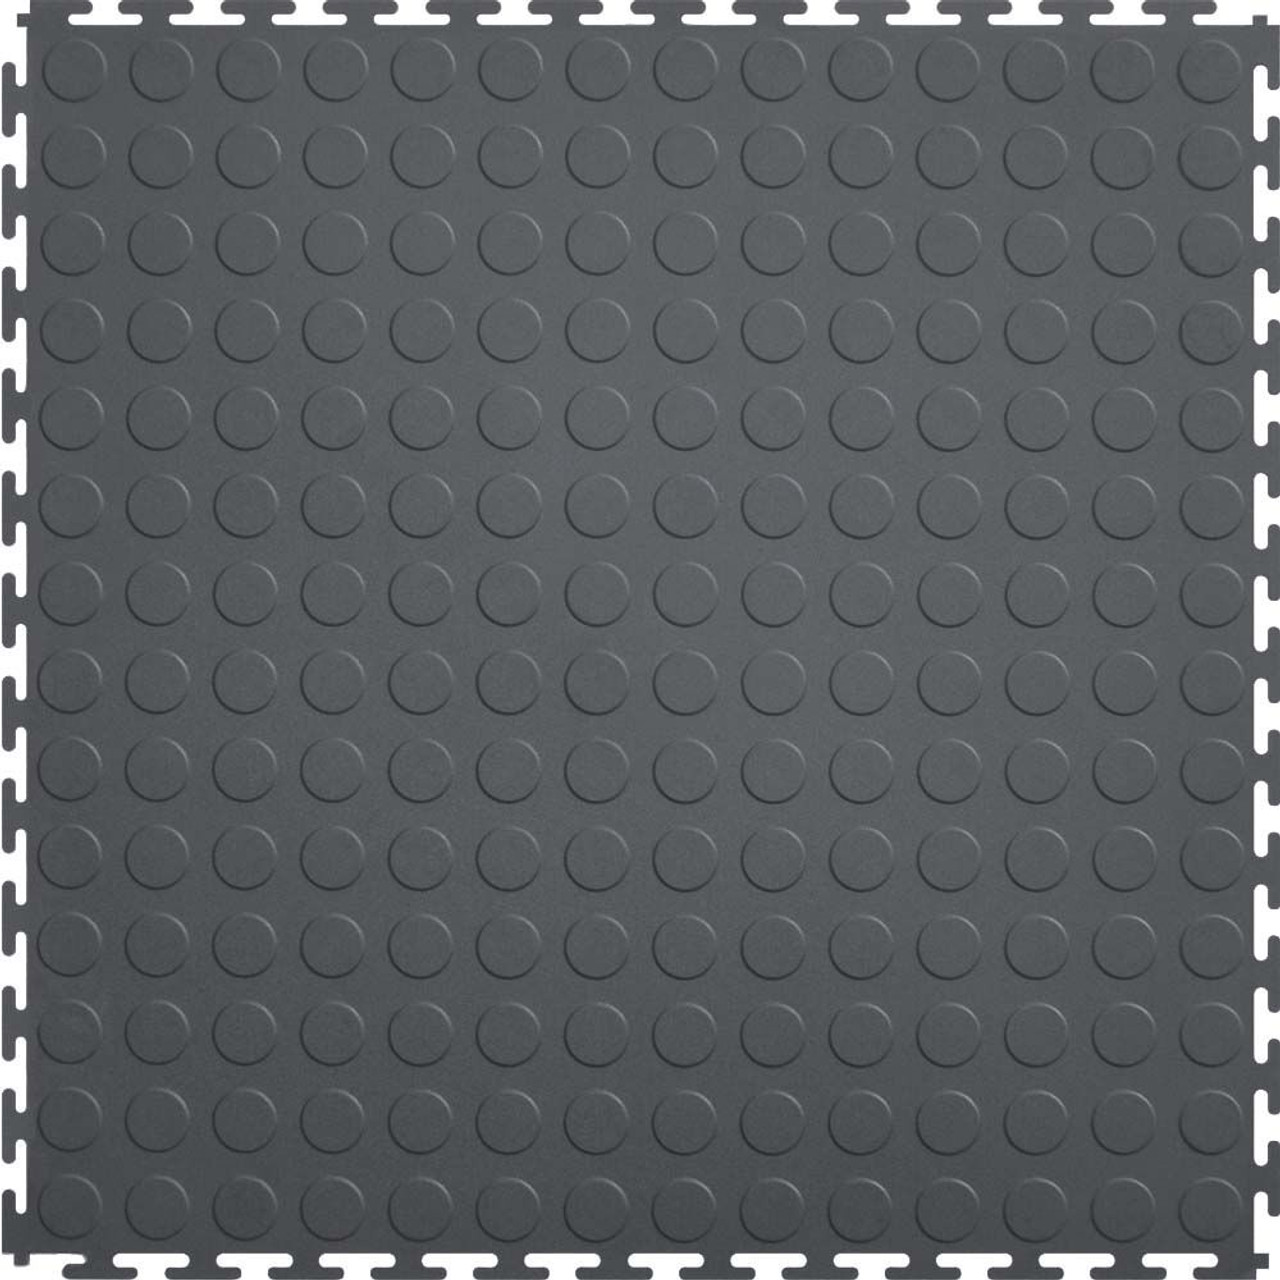 Flexi Tile by Perfection Floor Tile, Coin Pattern Dark Grey